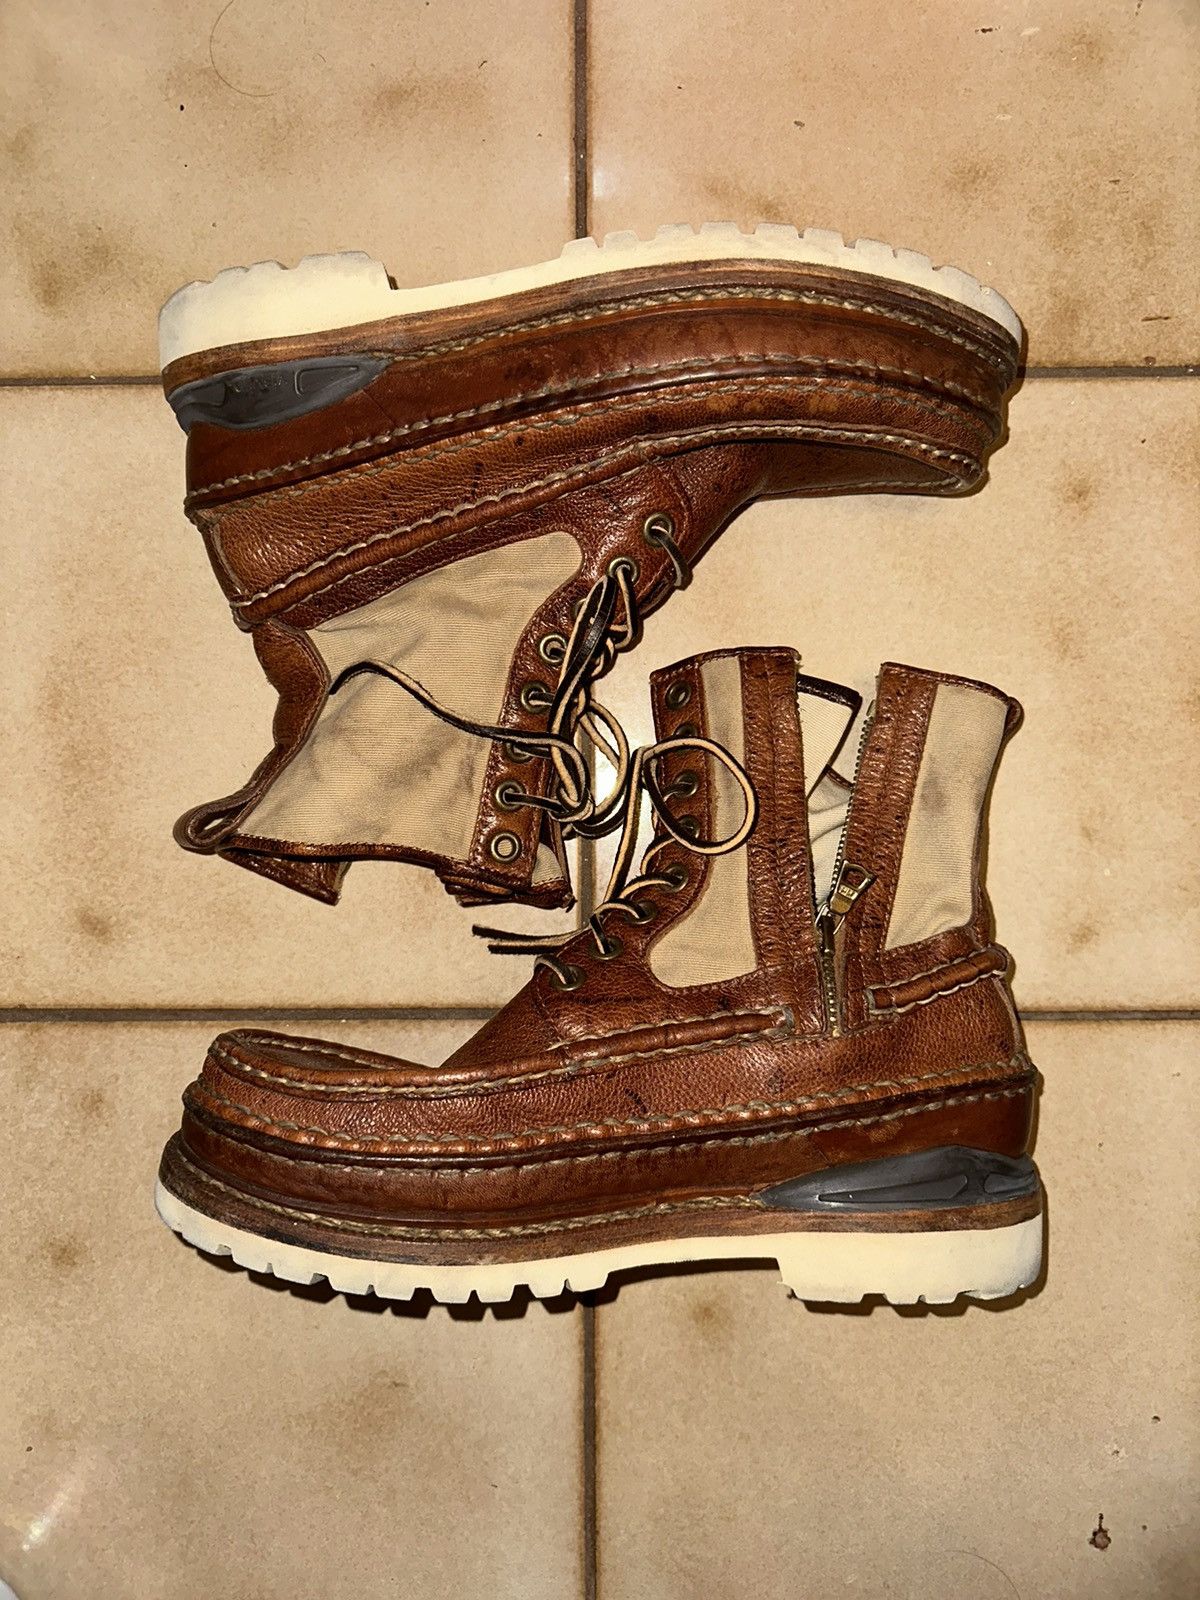 Visvim Grizzly Boot | Grailed